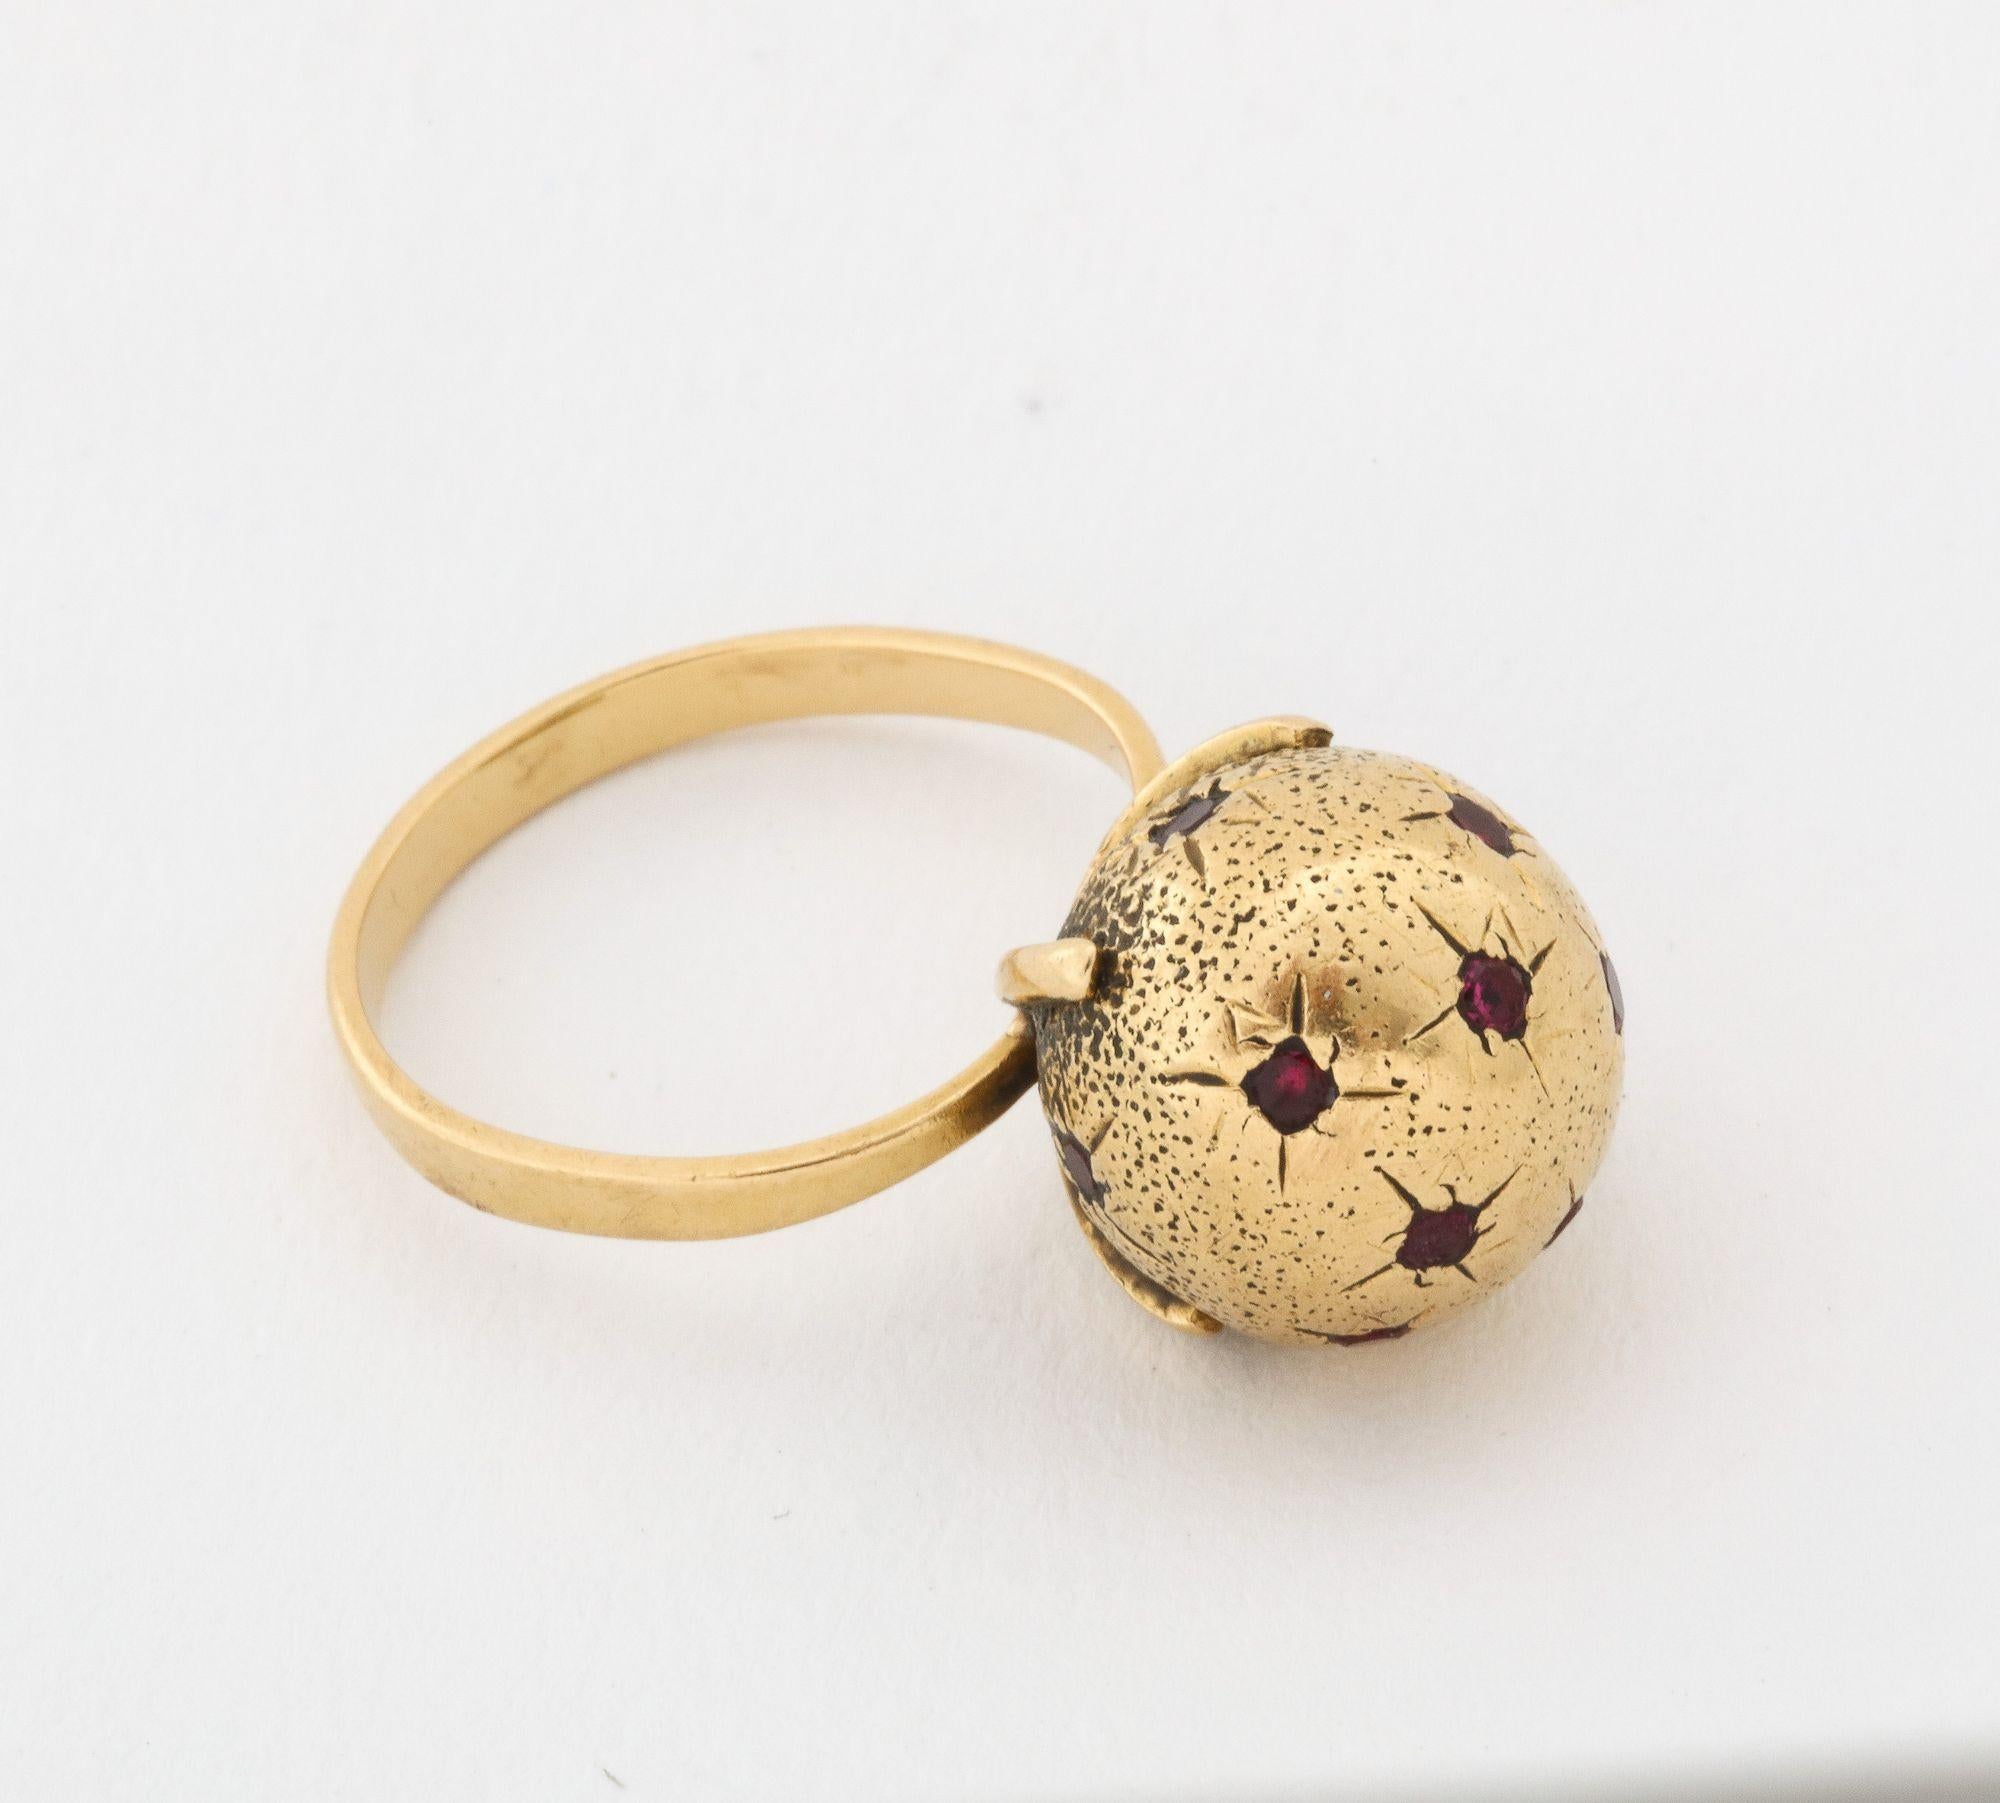 A very wearable 18 k Gold Globe Ring with Rubies set in the star. Very chic size 7 and can easily be sized to fit